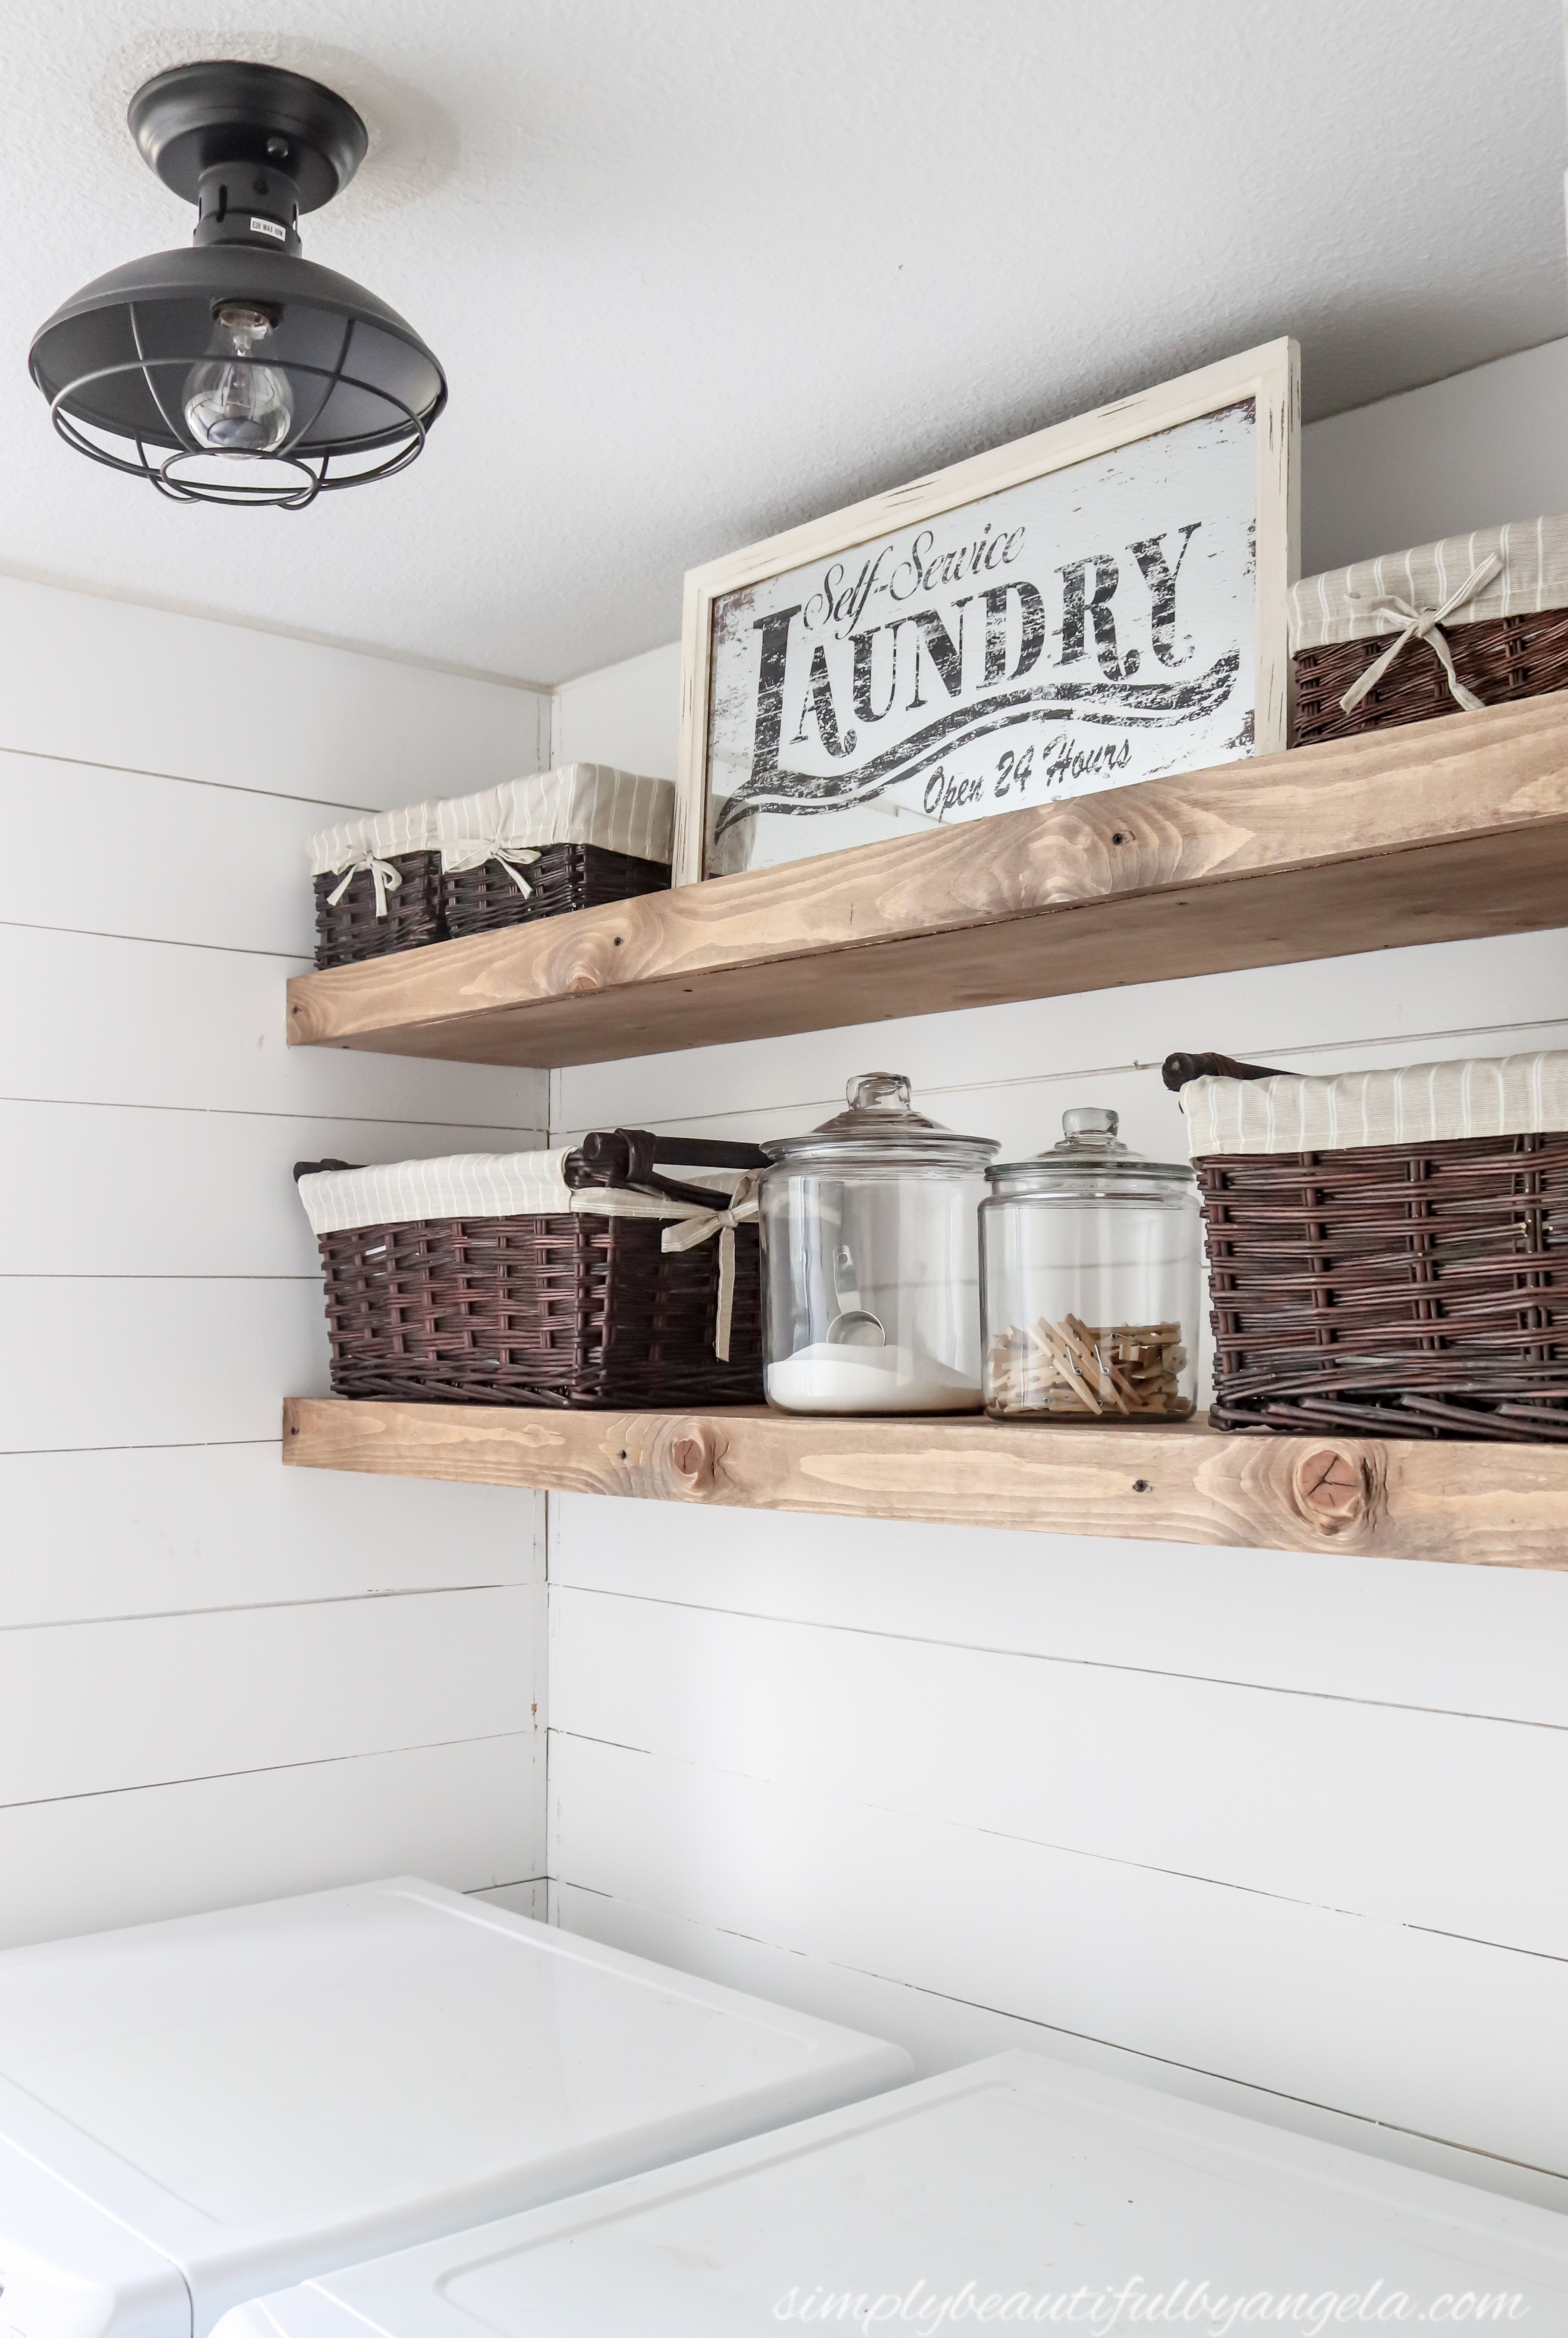 How to Build Laundry Shelves